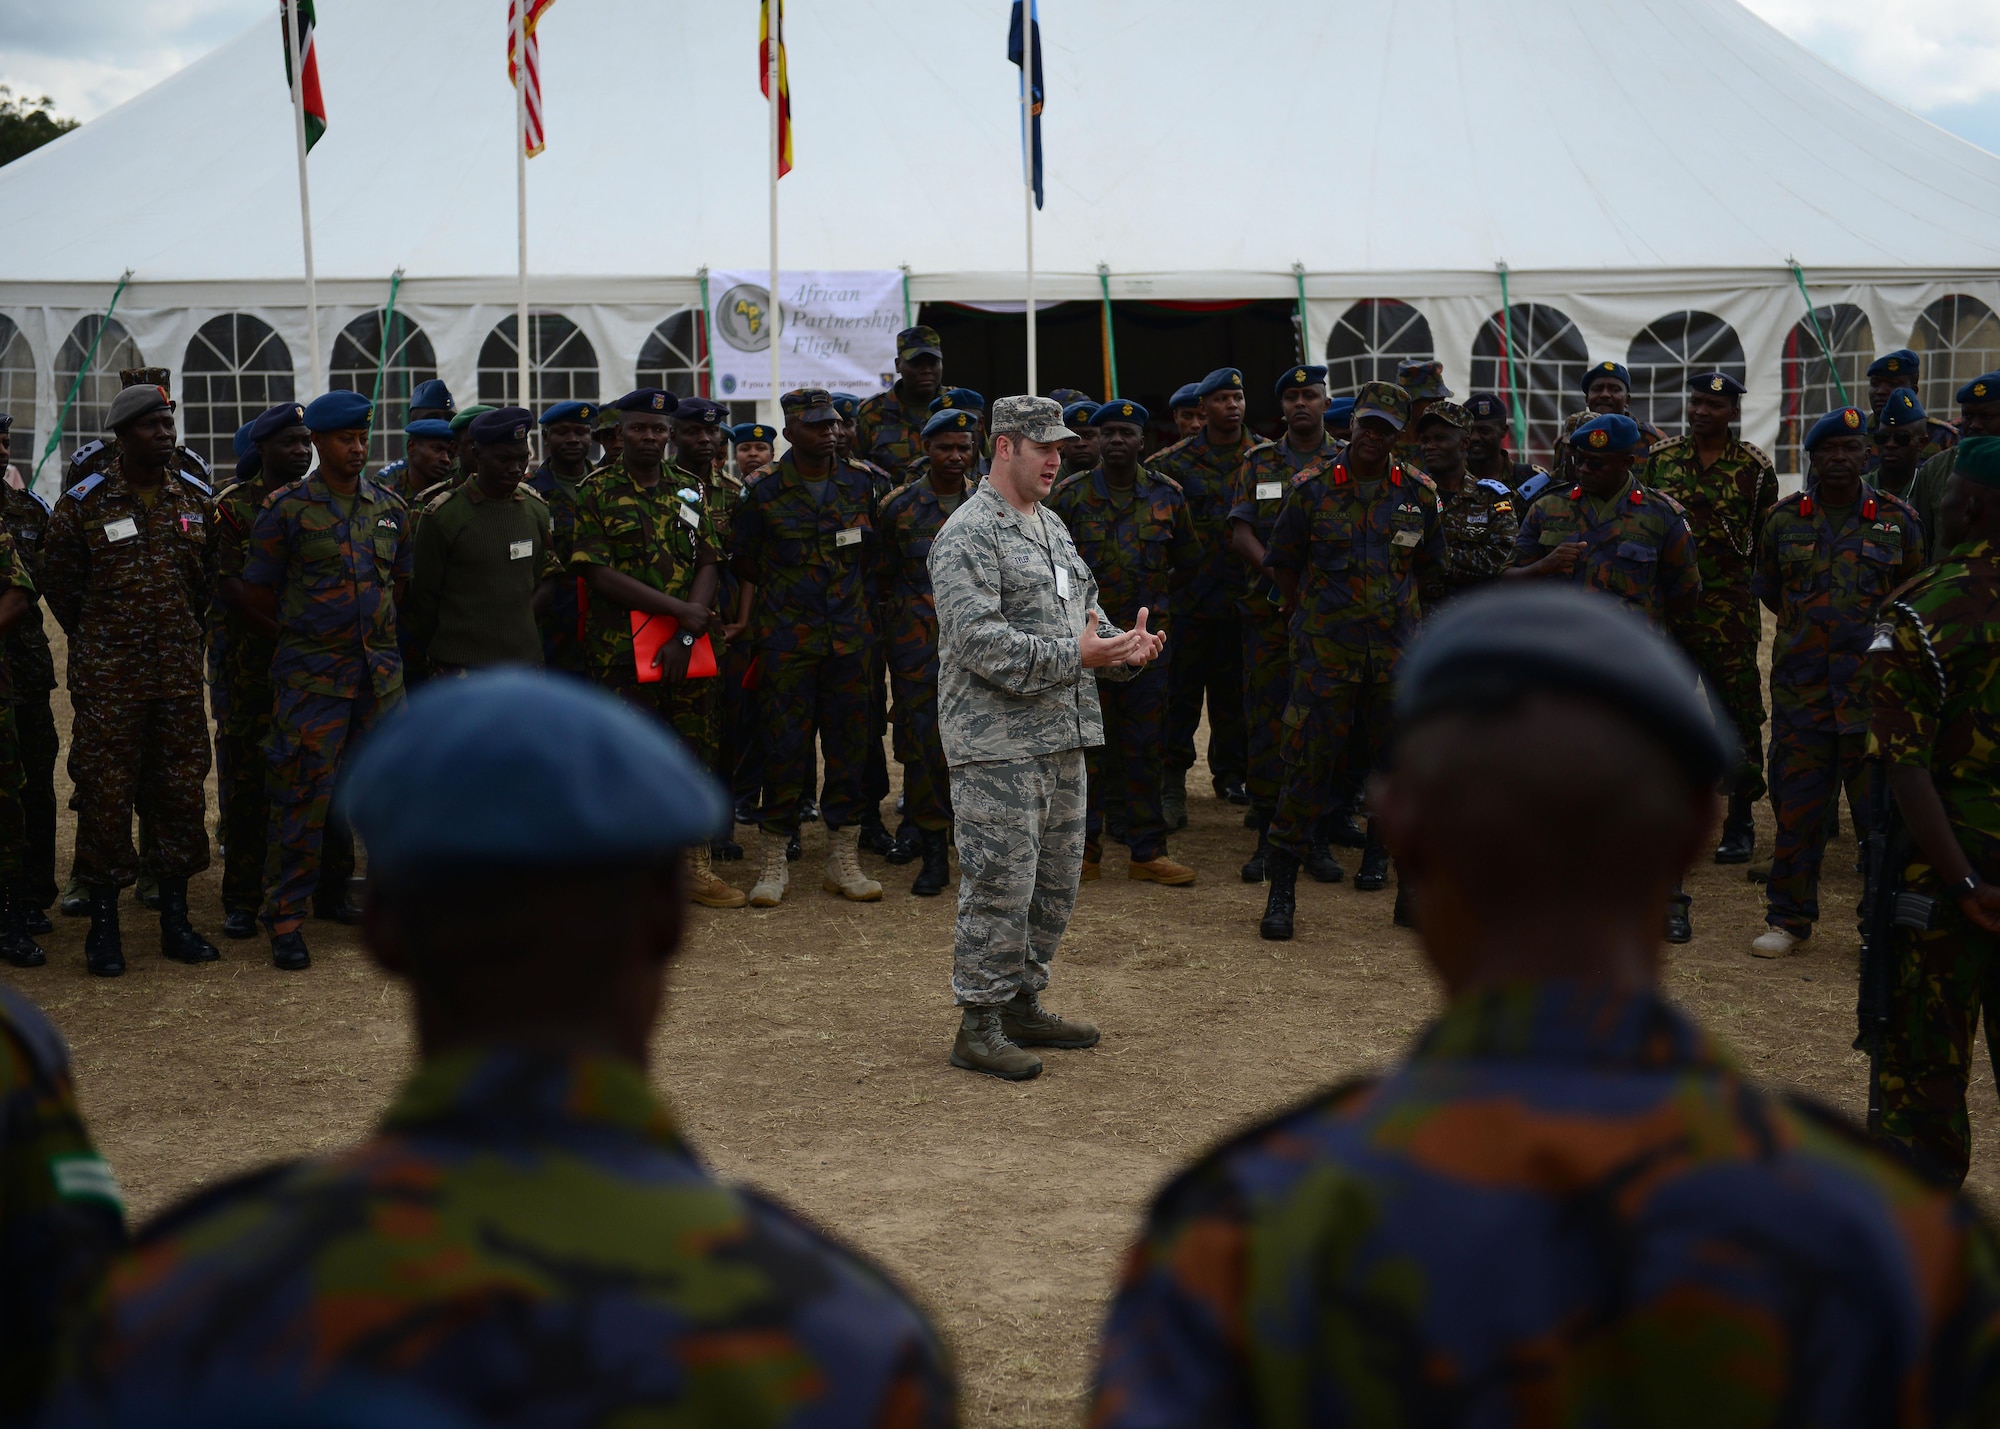 U.S. Air Force Maj. Todd Tyler, U.S. Air Forces in Europe and Air Forces Africa, African Partnership Flight Kenya mission commander, speaks with Kenyan and Ugandan Defense Forces at Laikipia Air Base, Kenya, June 20, 2016. More than 50 U.S. Air Force Airmen participated in the first African Partnership Flight in Kenya. The APF is designed for U.S. and African partner nations to work together in a learning environment to help build expertise and professional knowledge and skills. (U.S. Air Force photo by Tech. Sgt. Evelyn Chavez/Released)